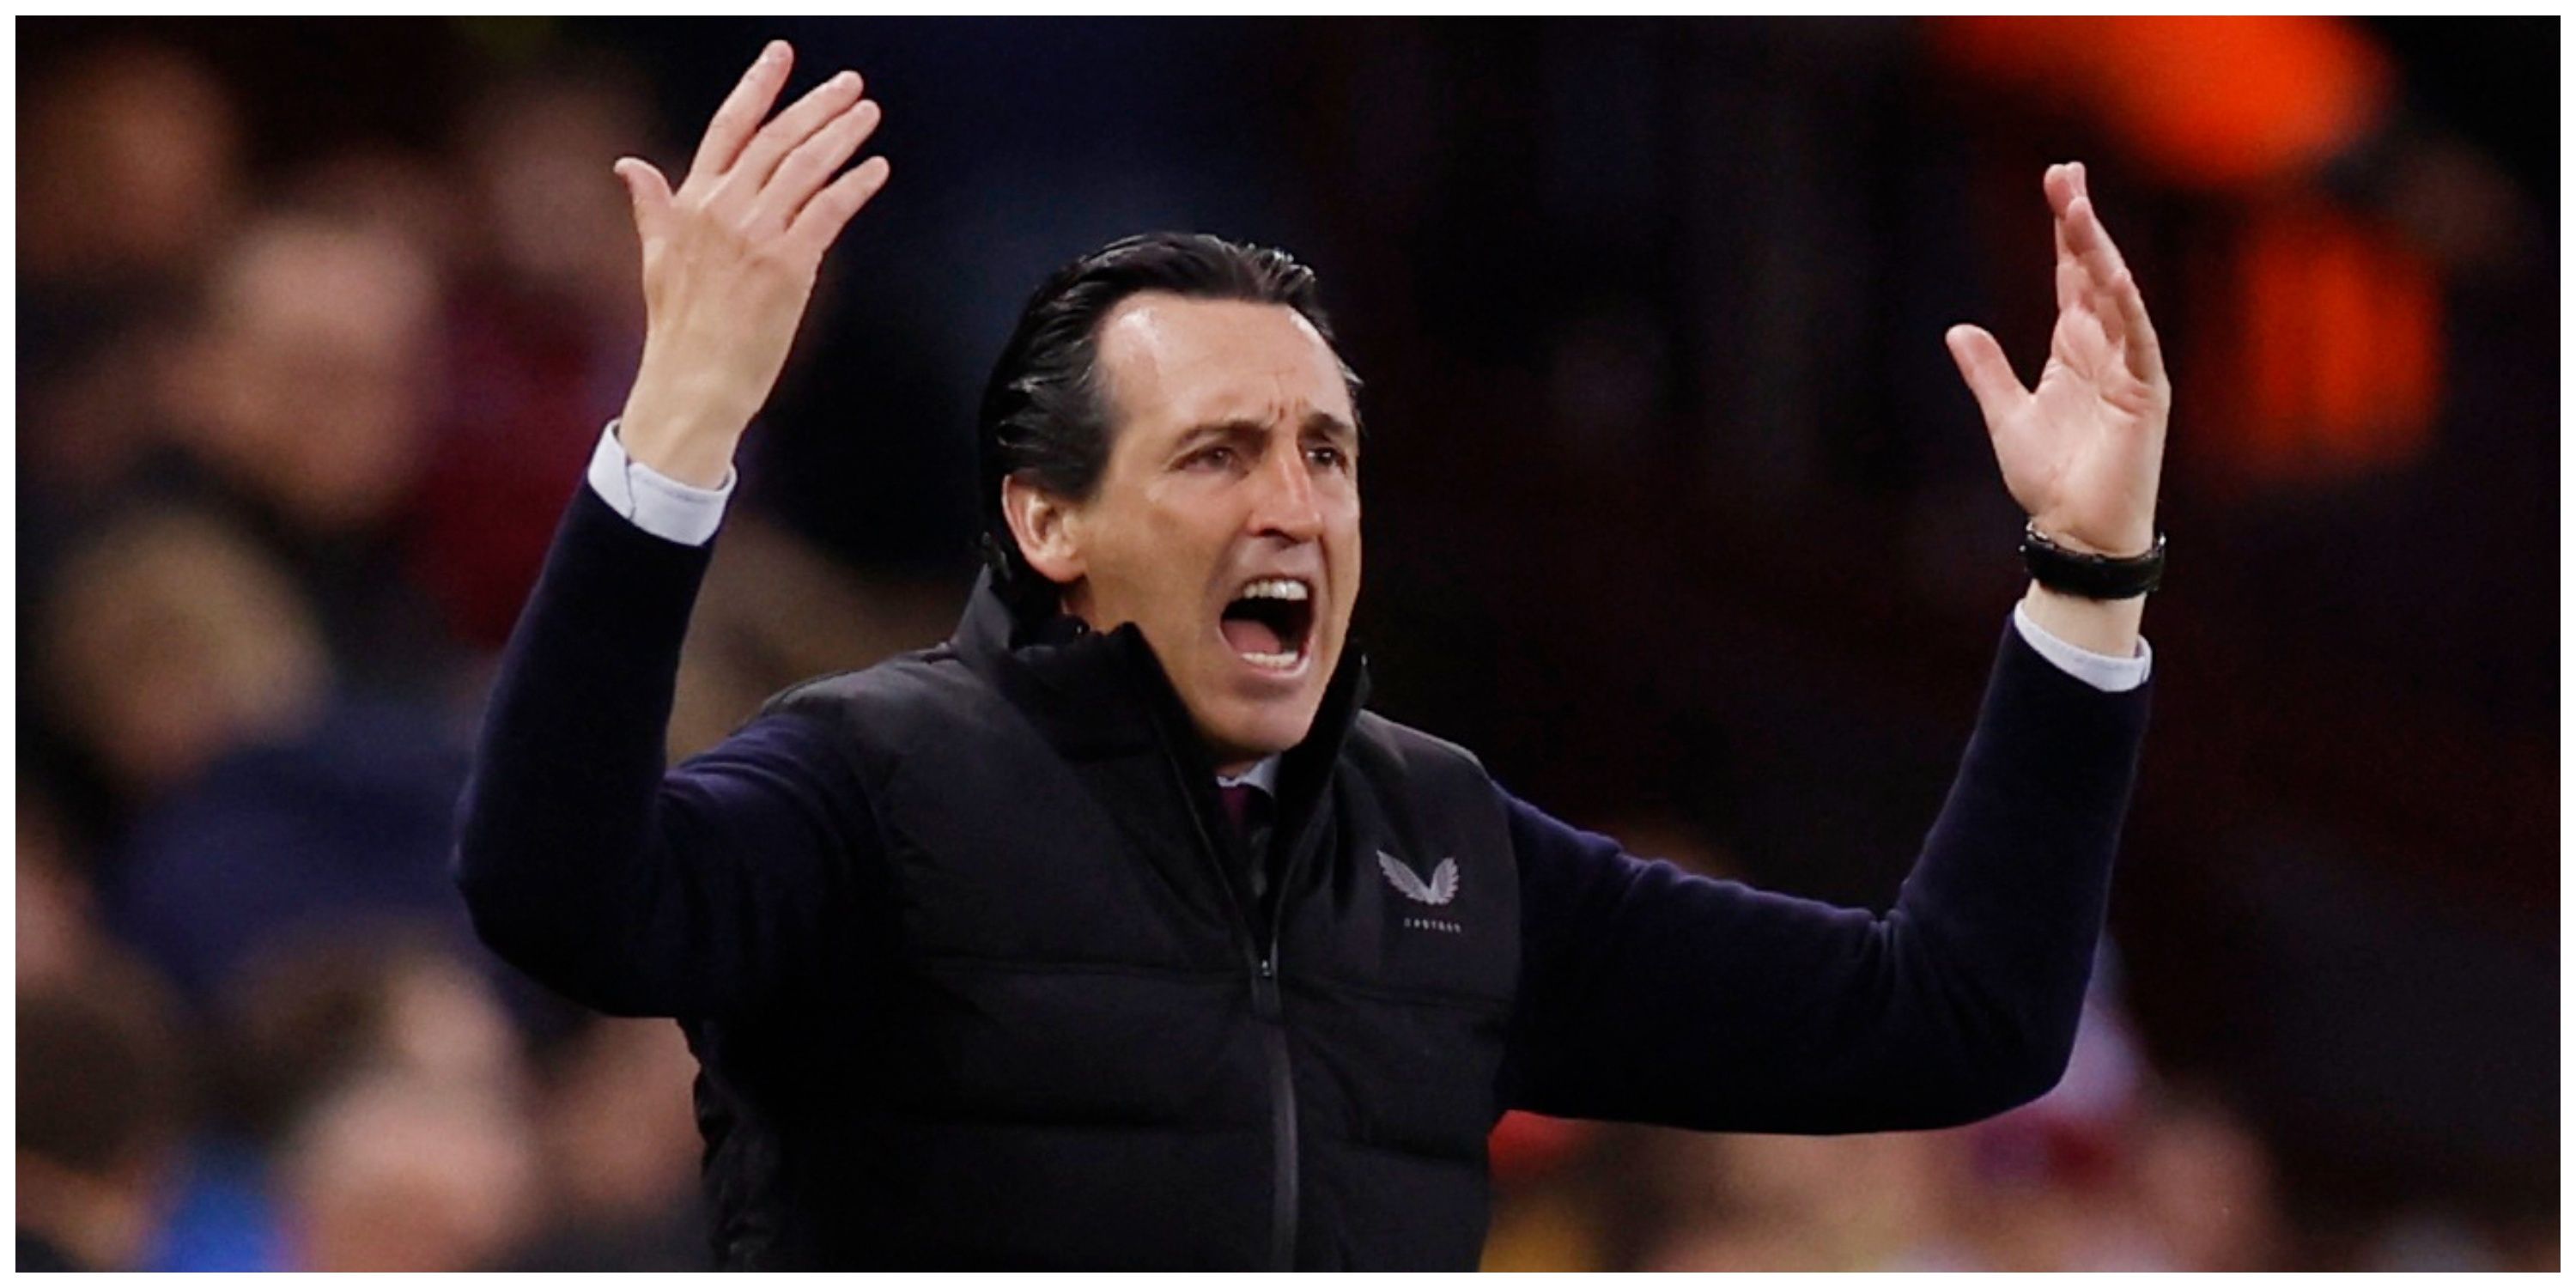 Aston Villa manager Unai Emery throwing arms up in air